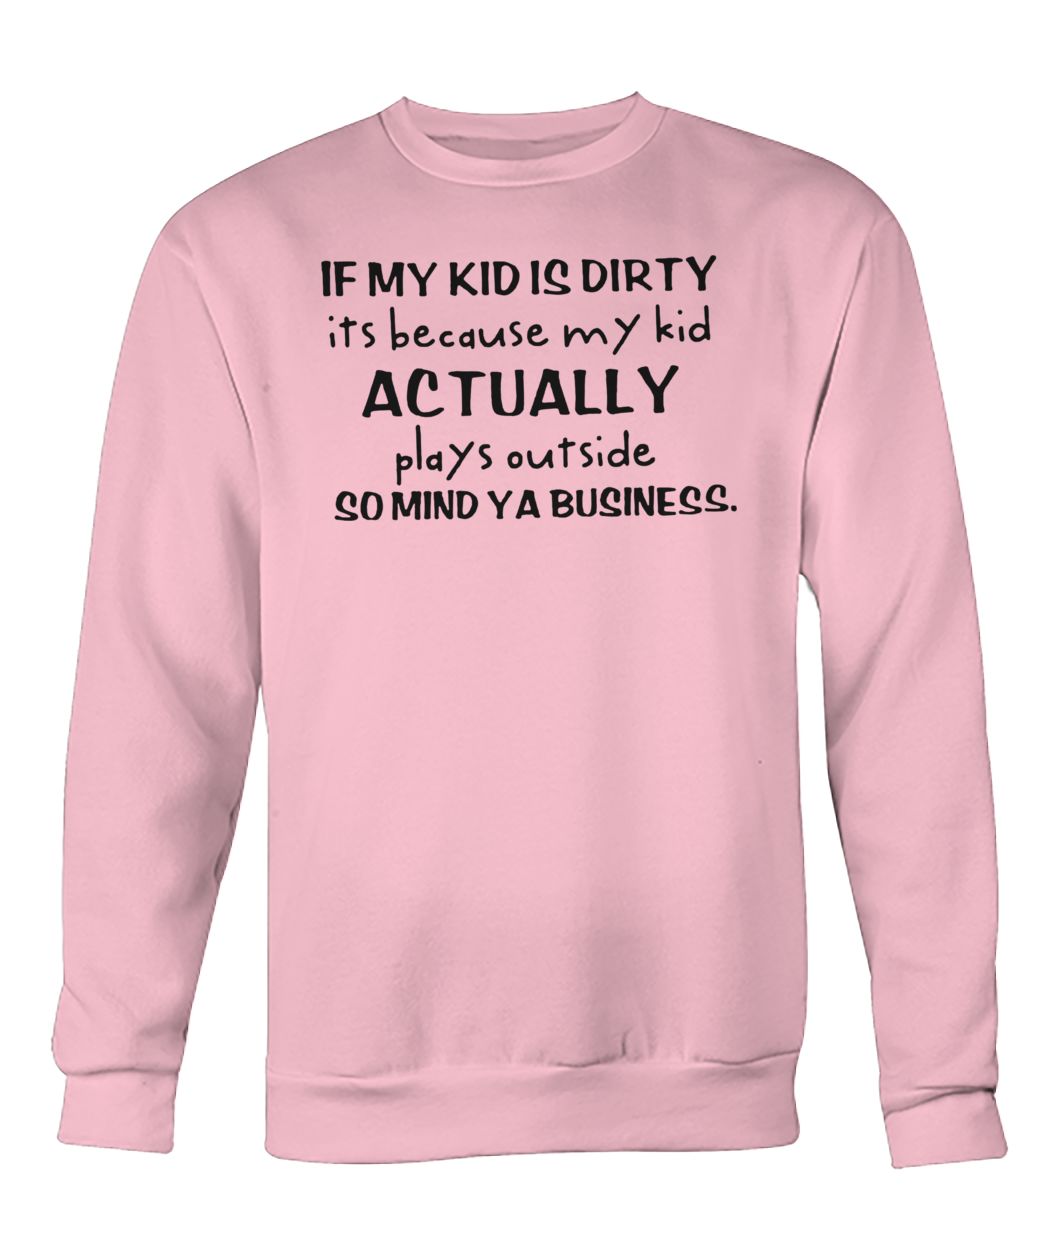 If my kid is dirty it's because my kid actually plays outside so mind ya business crew neck sweatshirt